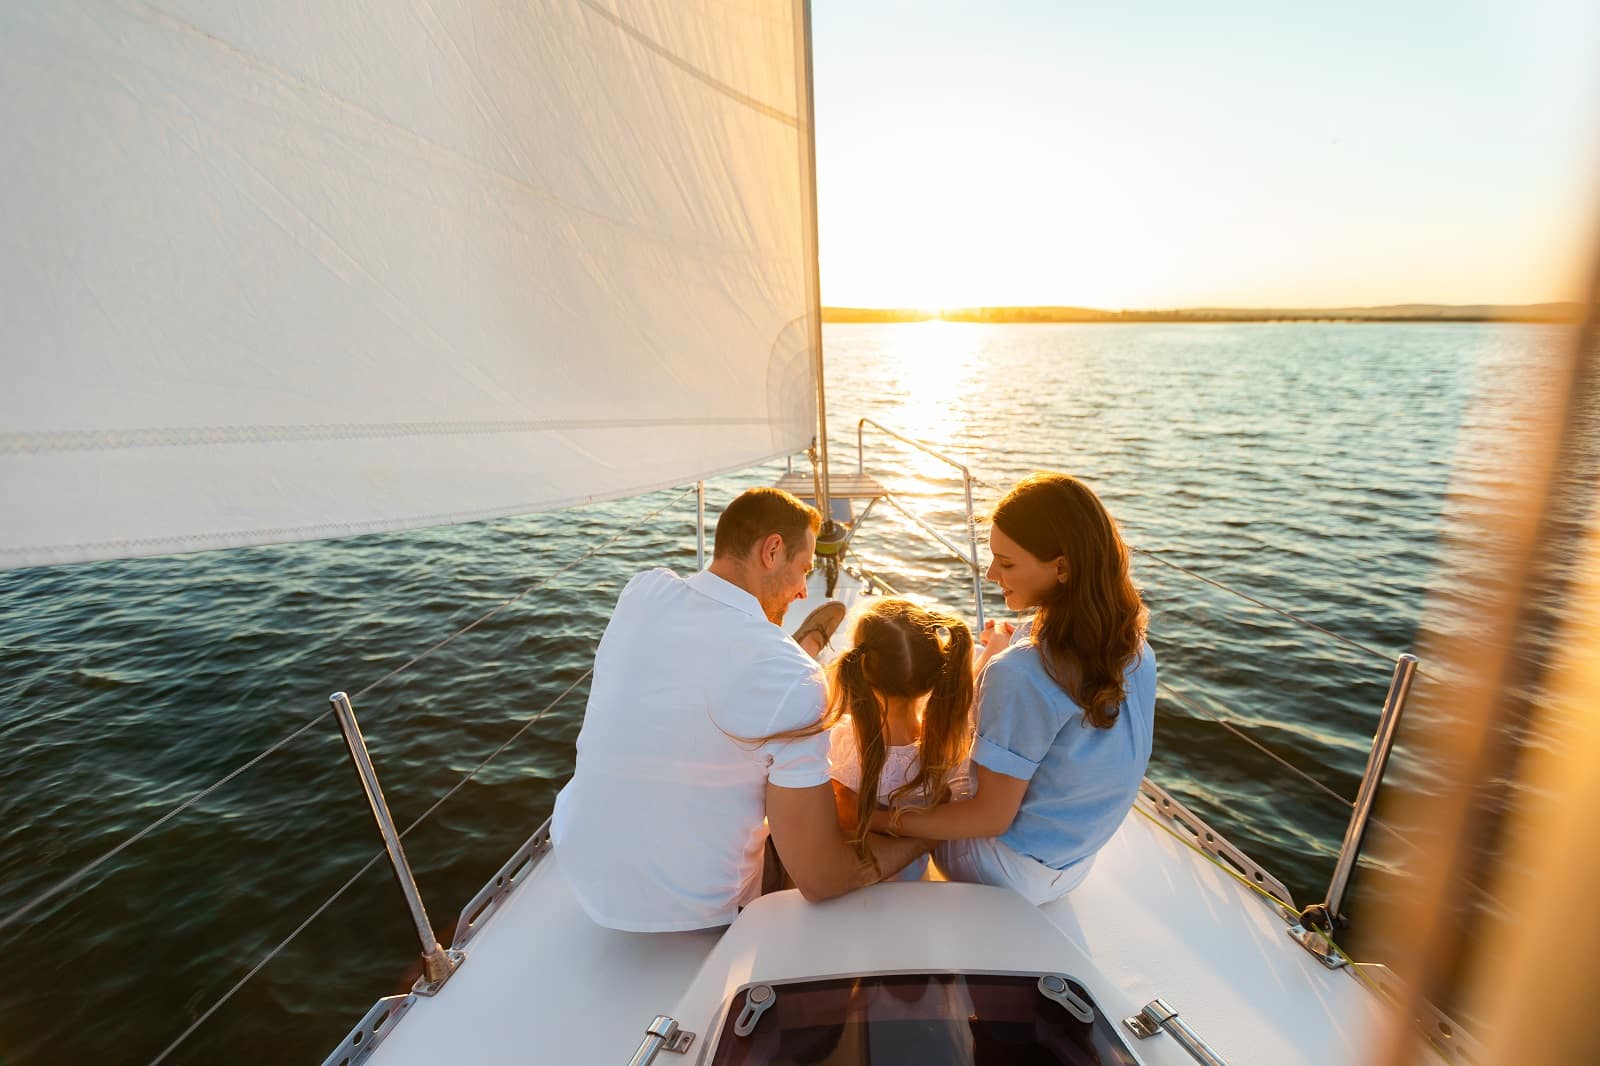 <p><span>For a truly romantic experience, consider a starlit sailboat ride. The calm waters and the starry sky create an unforgettable ambiance. Glide across the gentle waves as the city lights fade into the background and the vast sky opens up above you.</span></p> <p><b>Insider’s Tip: </b><span>Book a private charter for a more intimate experience.</span></p>